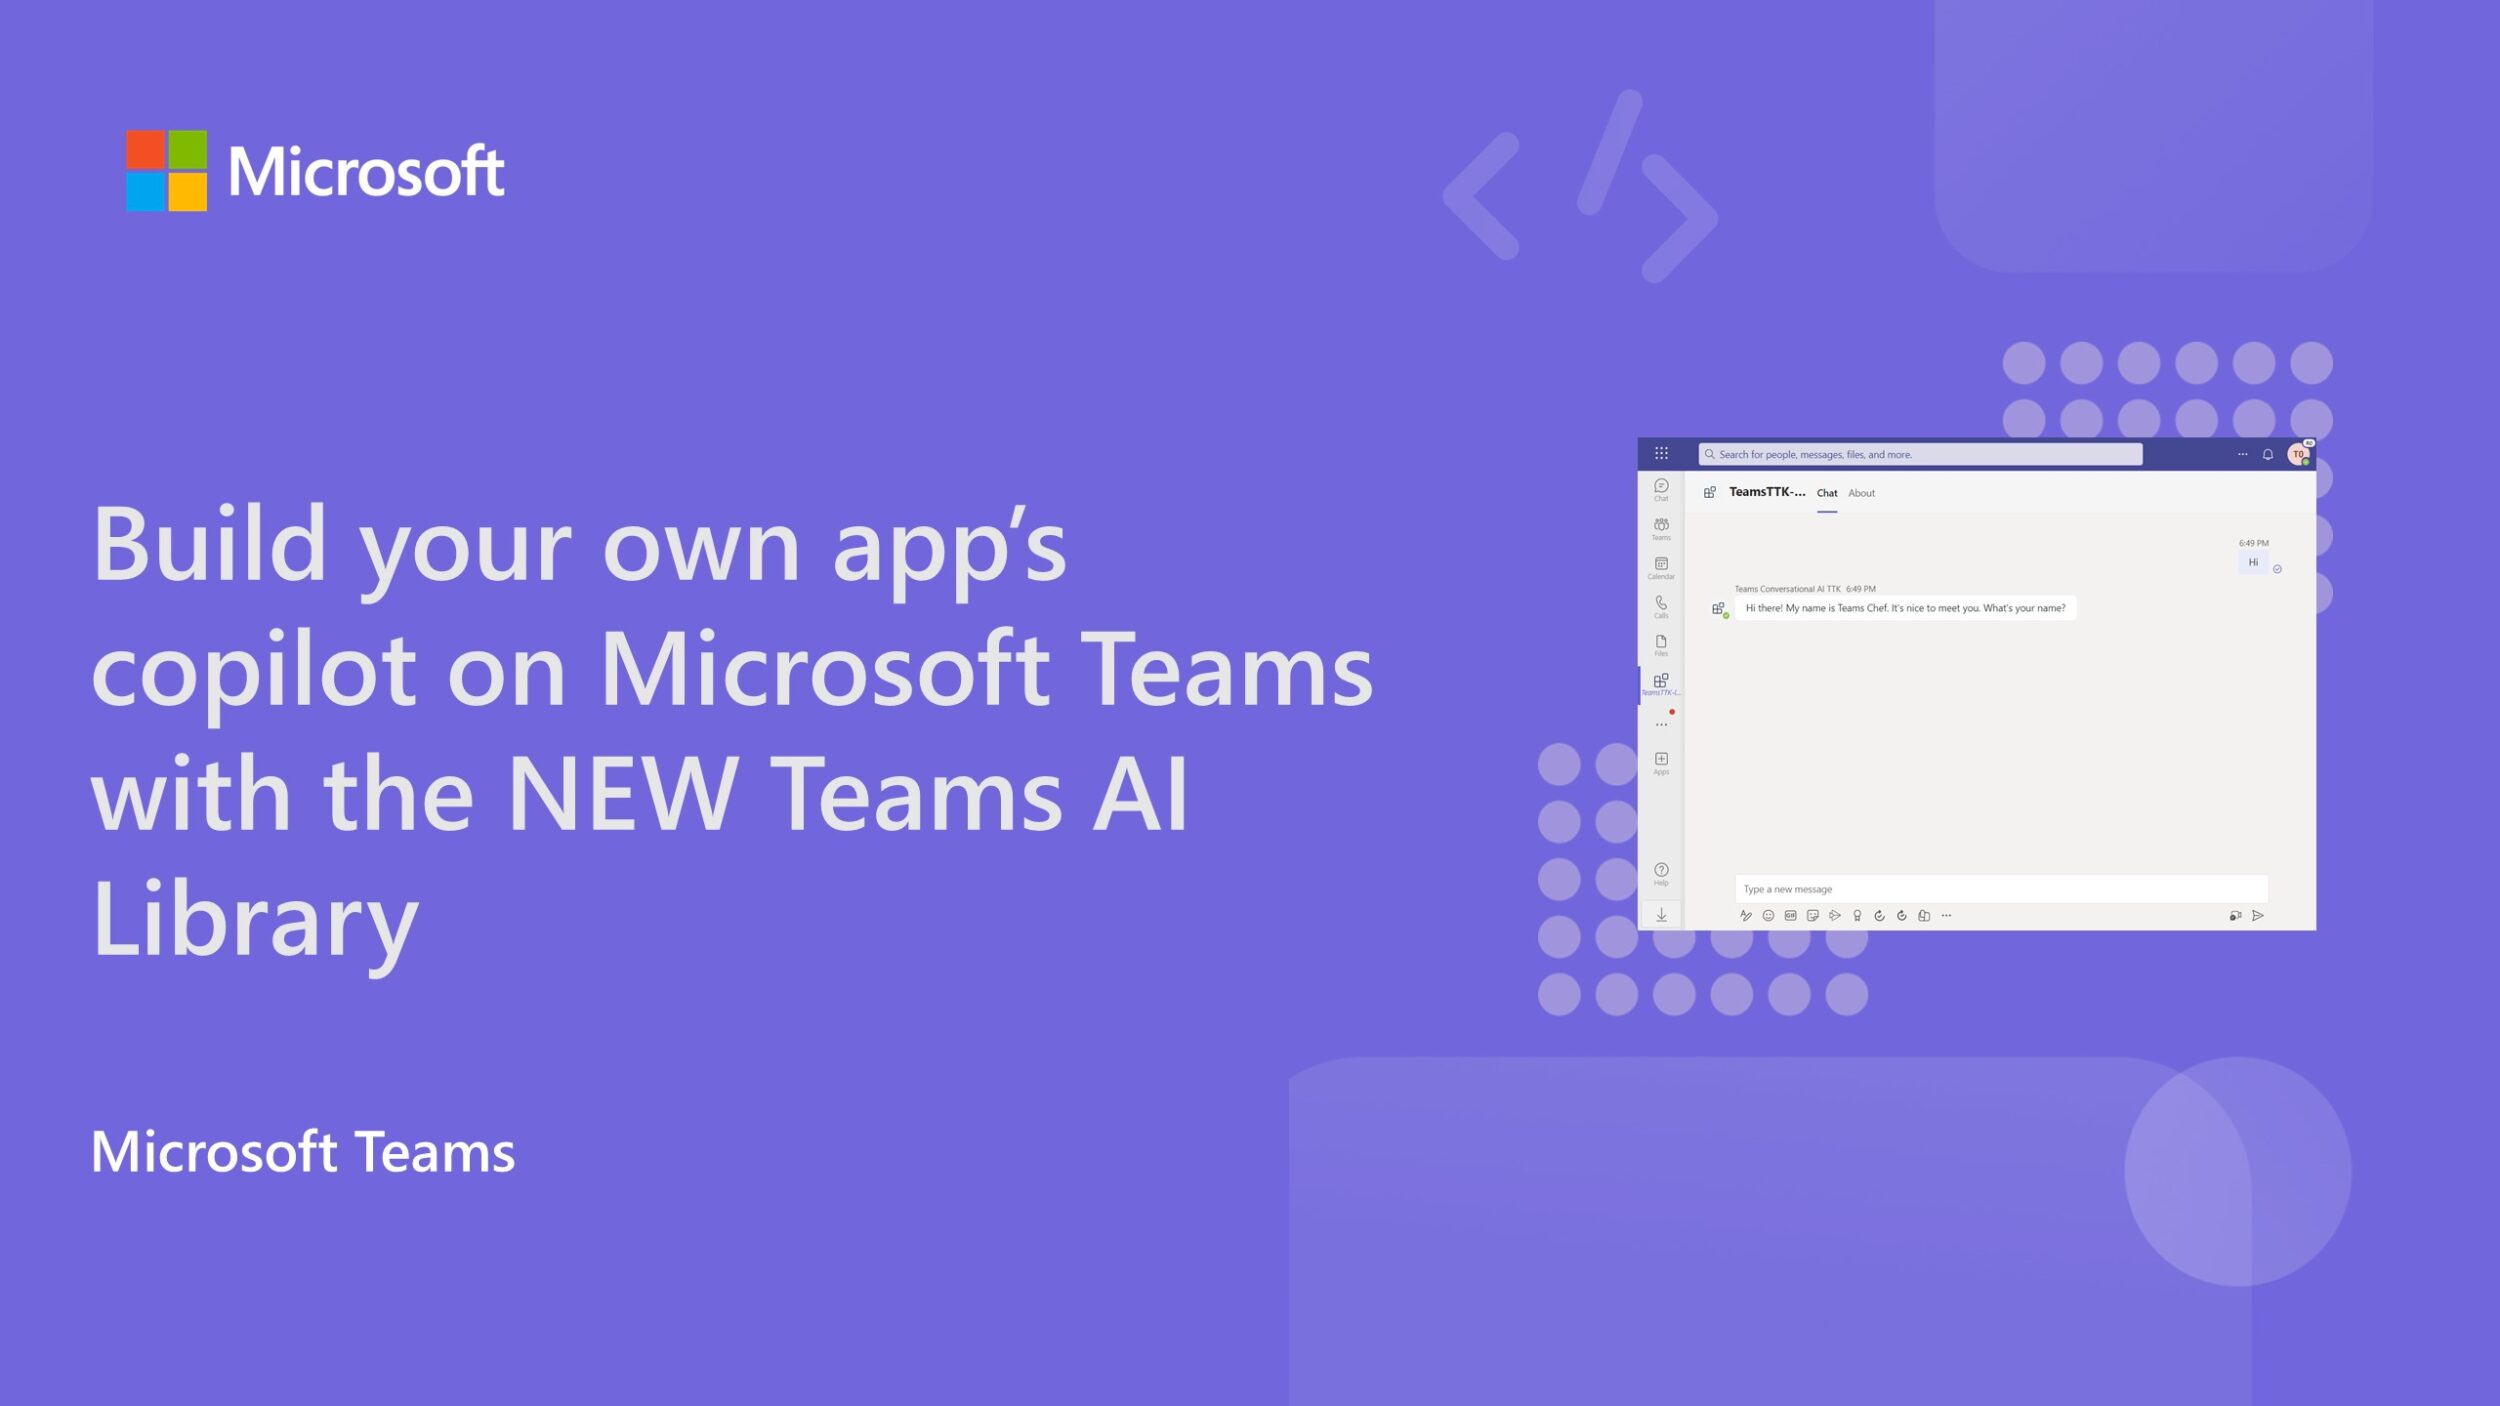 Build your own app’s copilot on Microsoft Teams with the new Teams AI Library